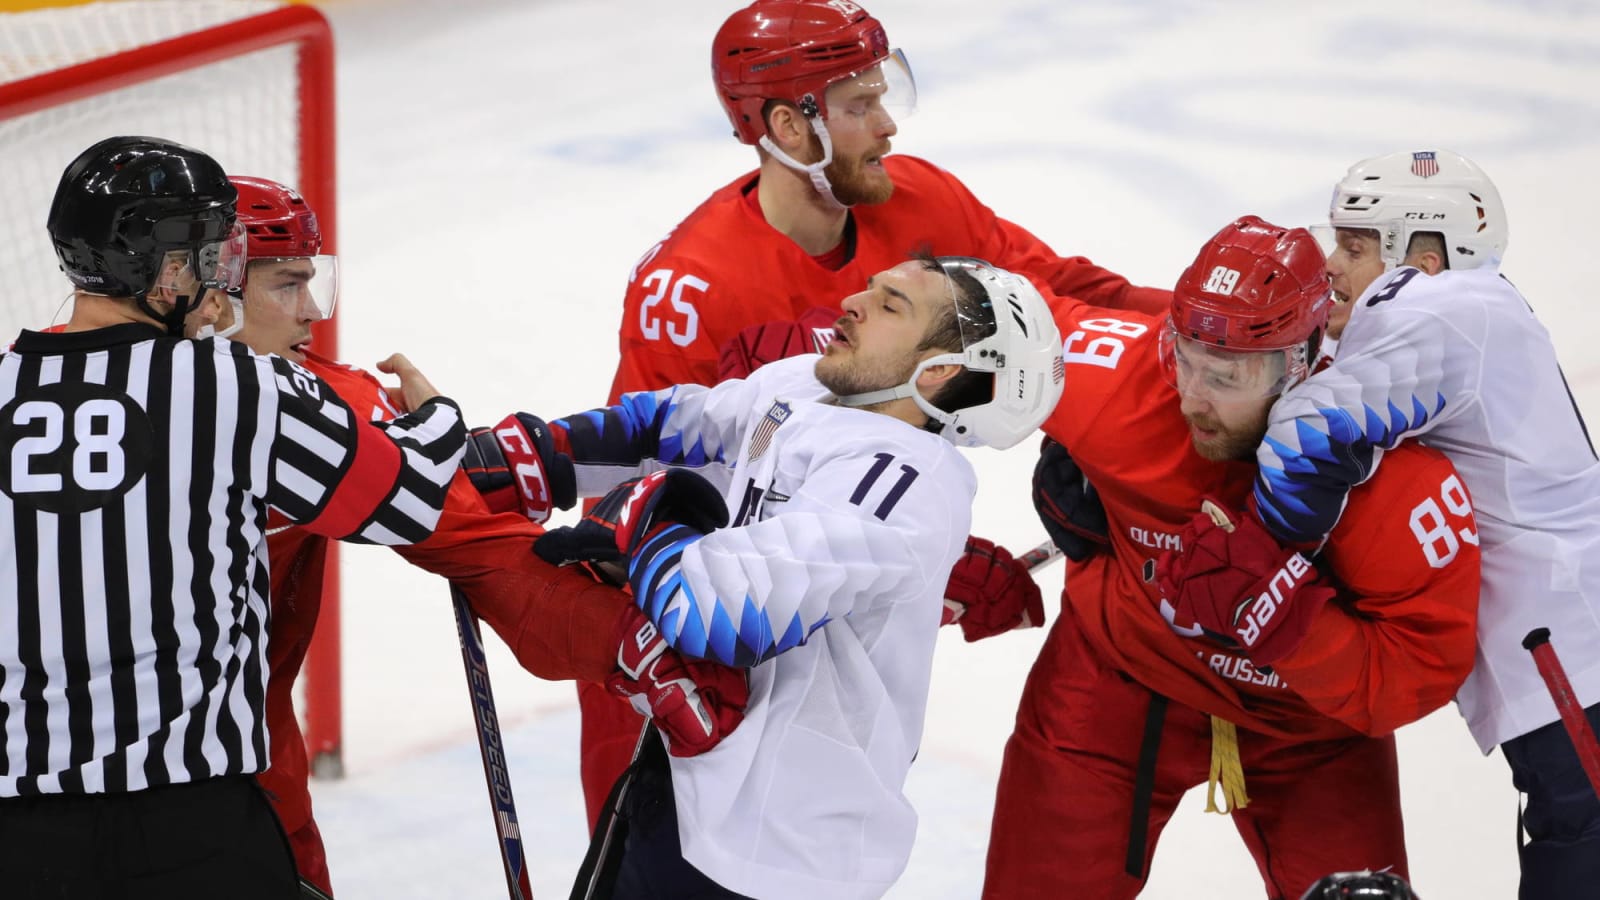 Team USA hockey accuses Russians of poor sportsmanship